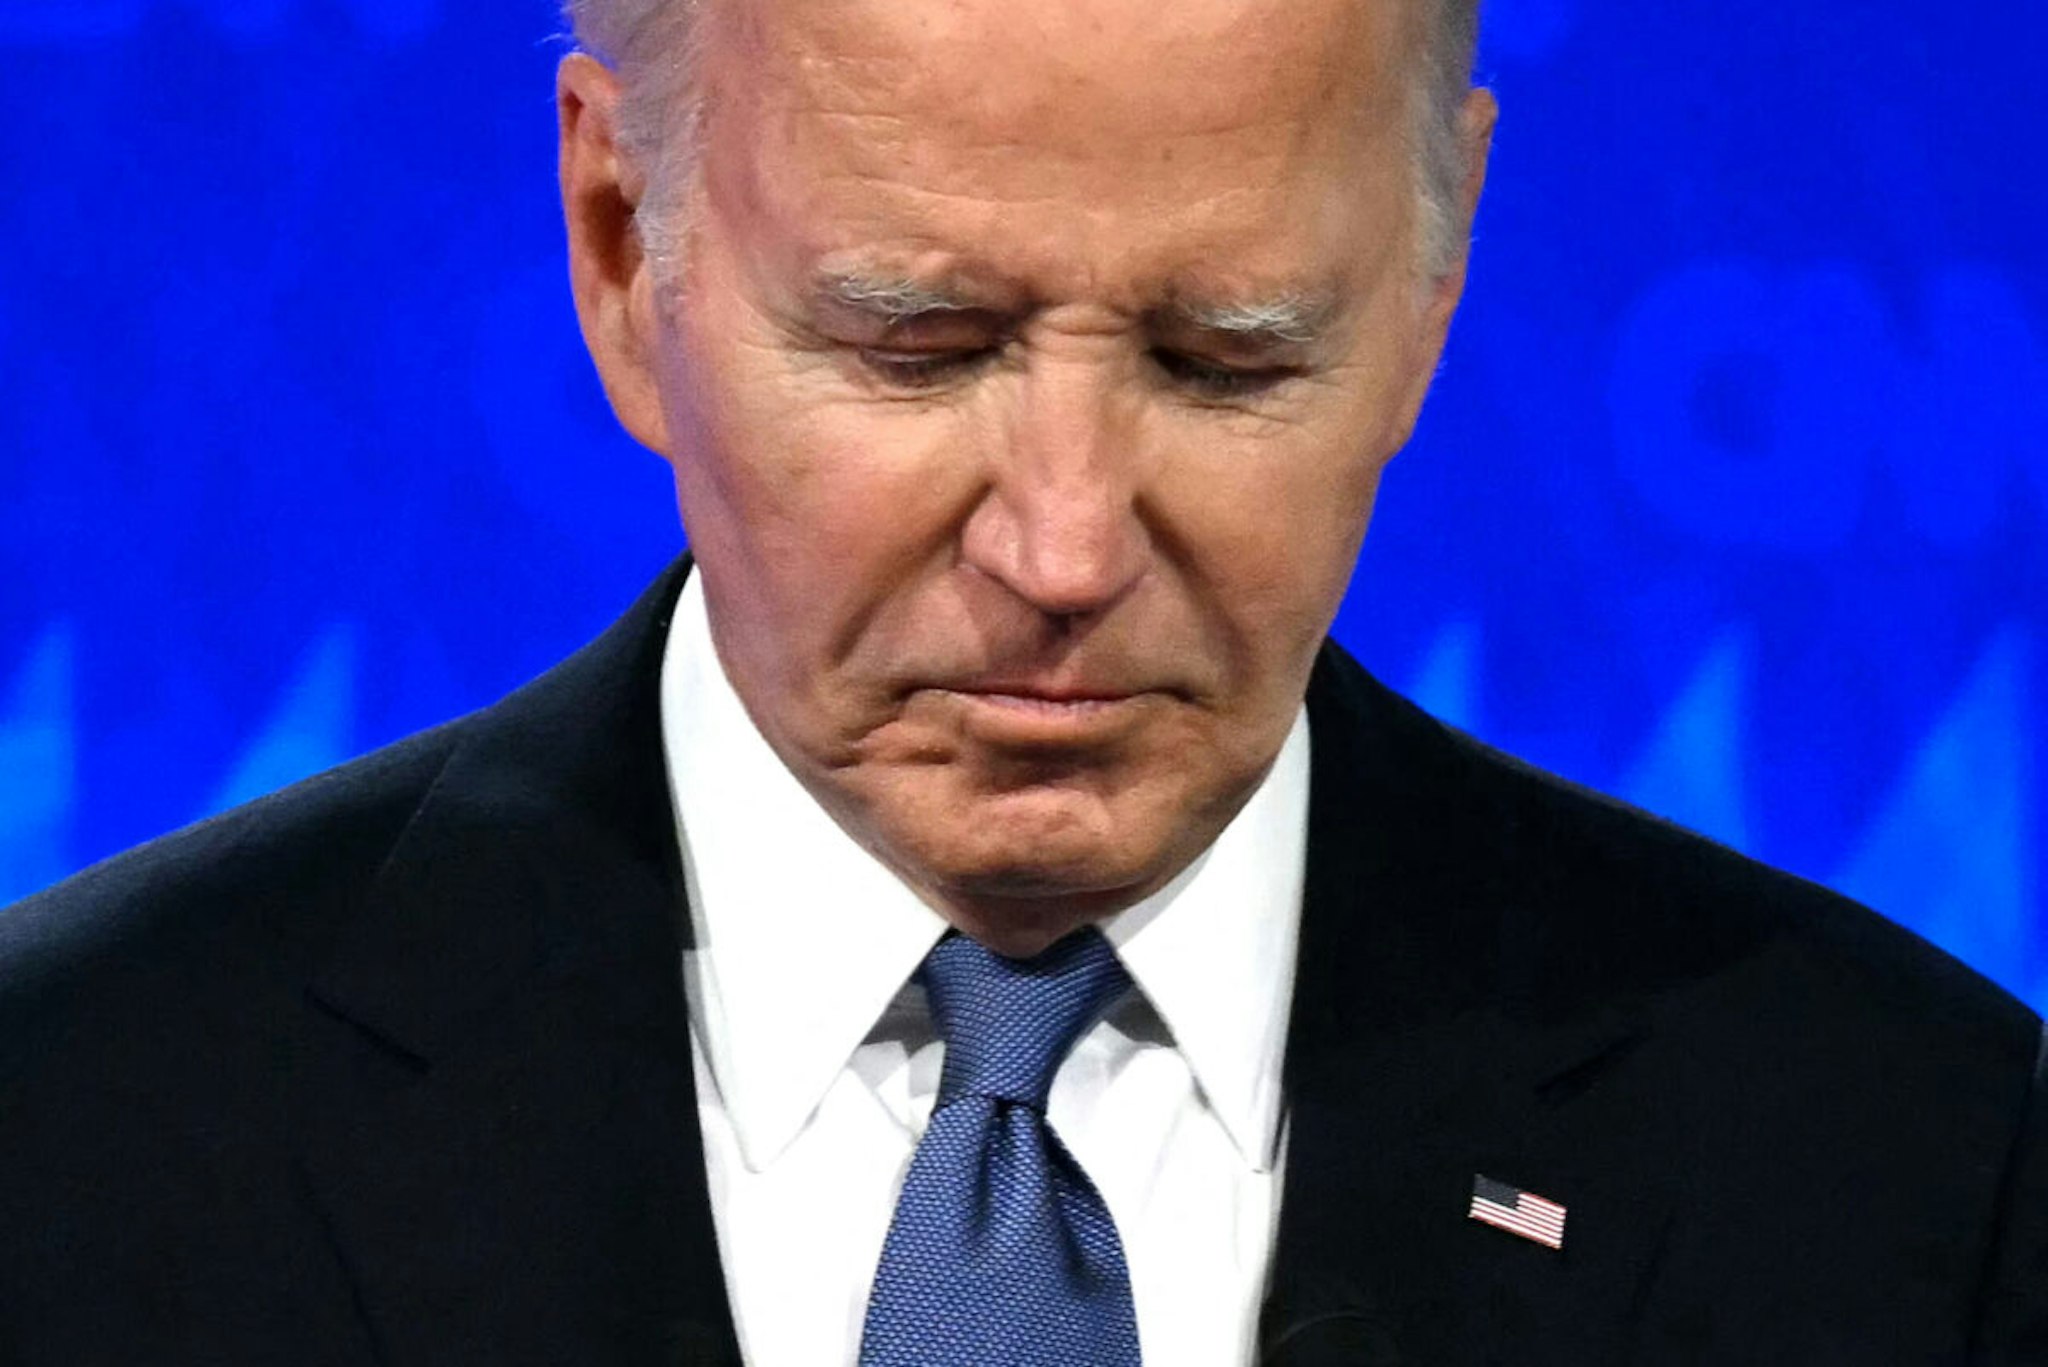 TOPSHOT - US President Joe Biden looks down as he participates in the first presidential debate of the 2024 elections with former US President and Republican presidential candidate Donald Trump at CNN's studios in Atlanta, Georgia, on June 27, 2024.